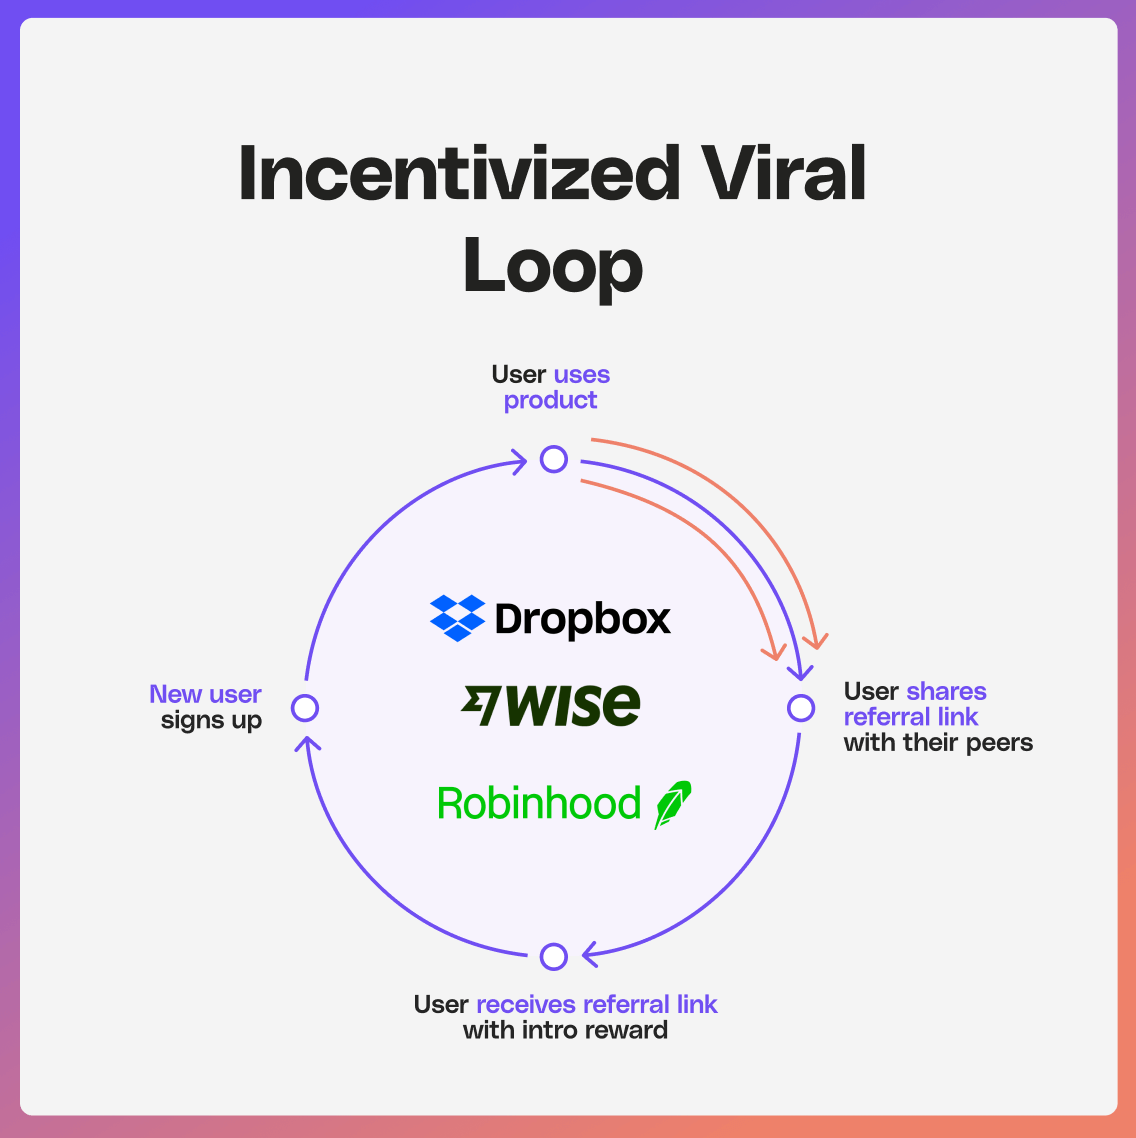 How incentivised viral loops are structured